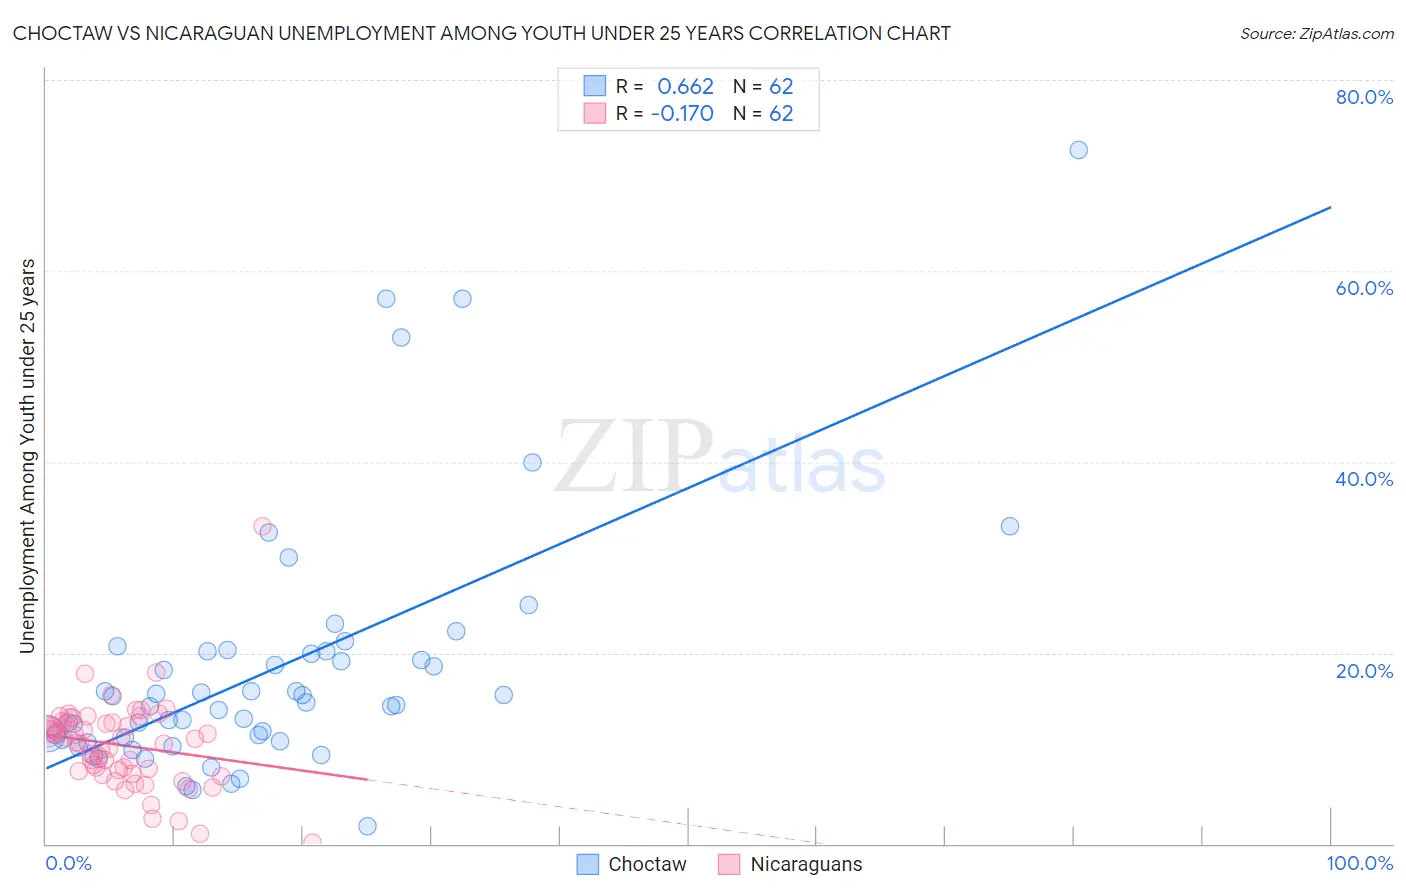 Choctaw vs Nicaraguan Unemployment Among Youth under 25 years